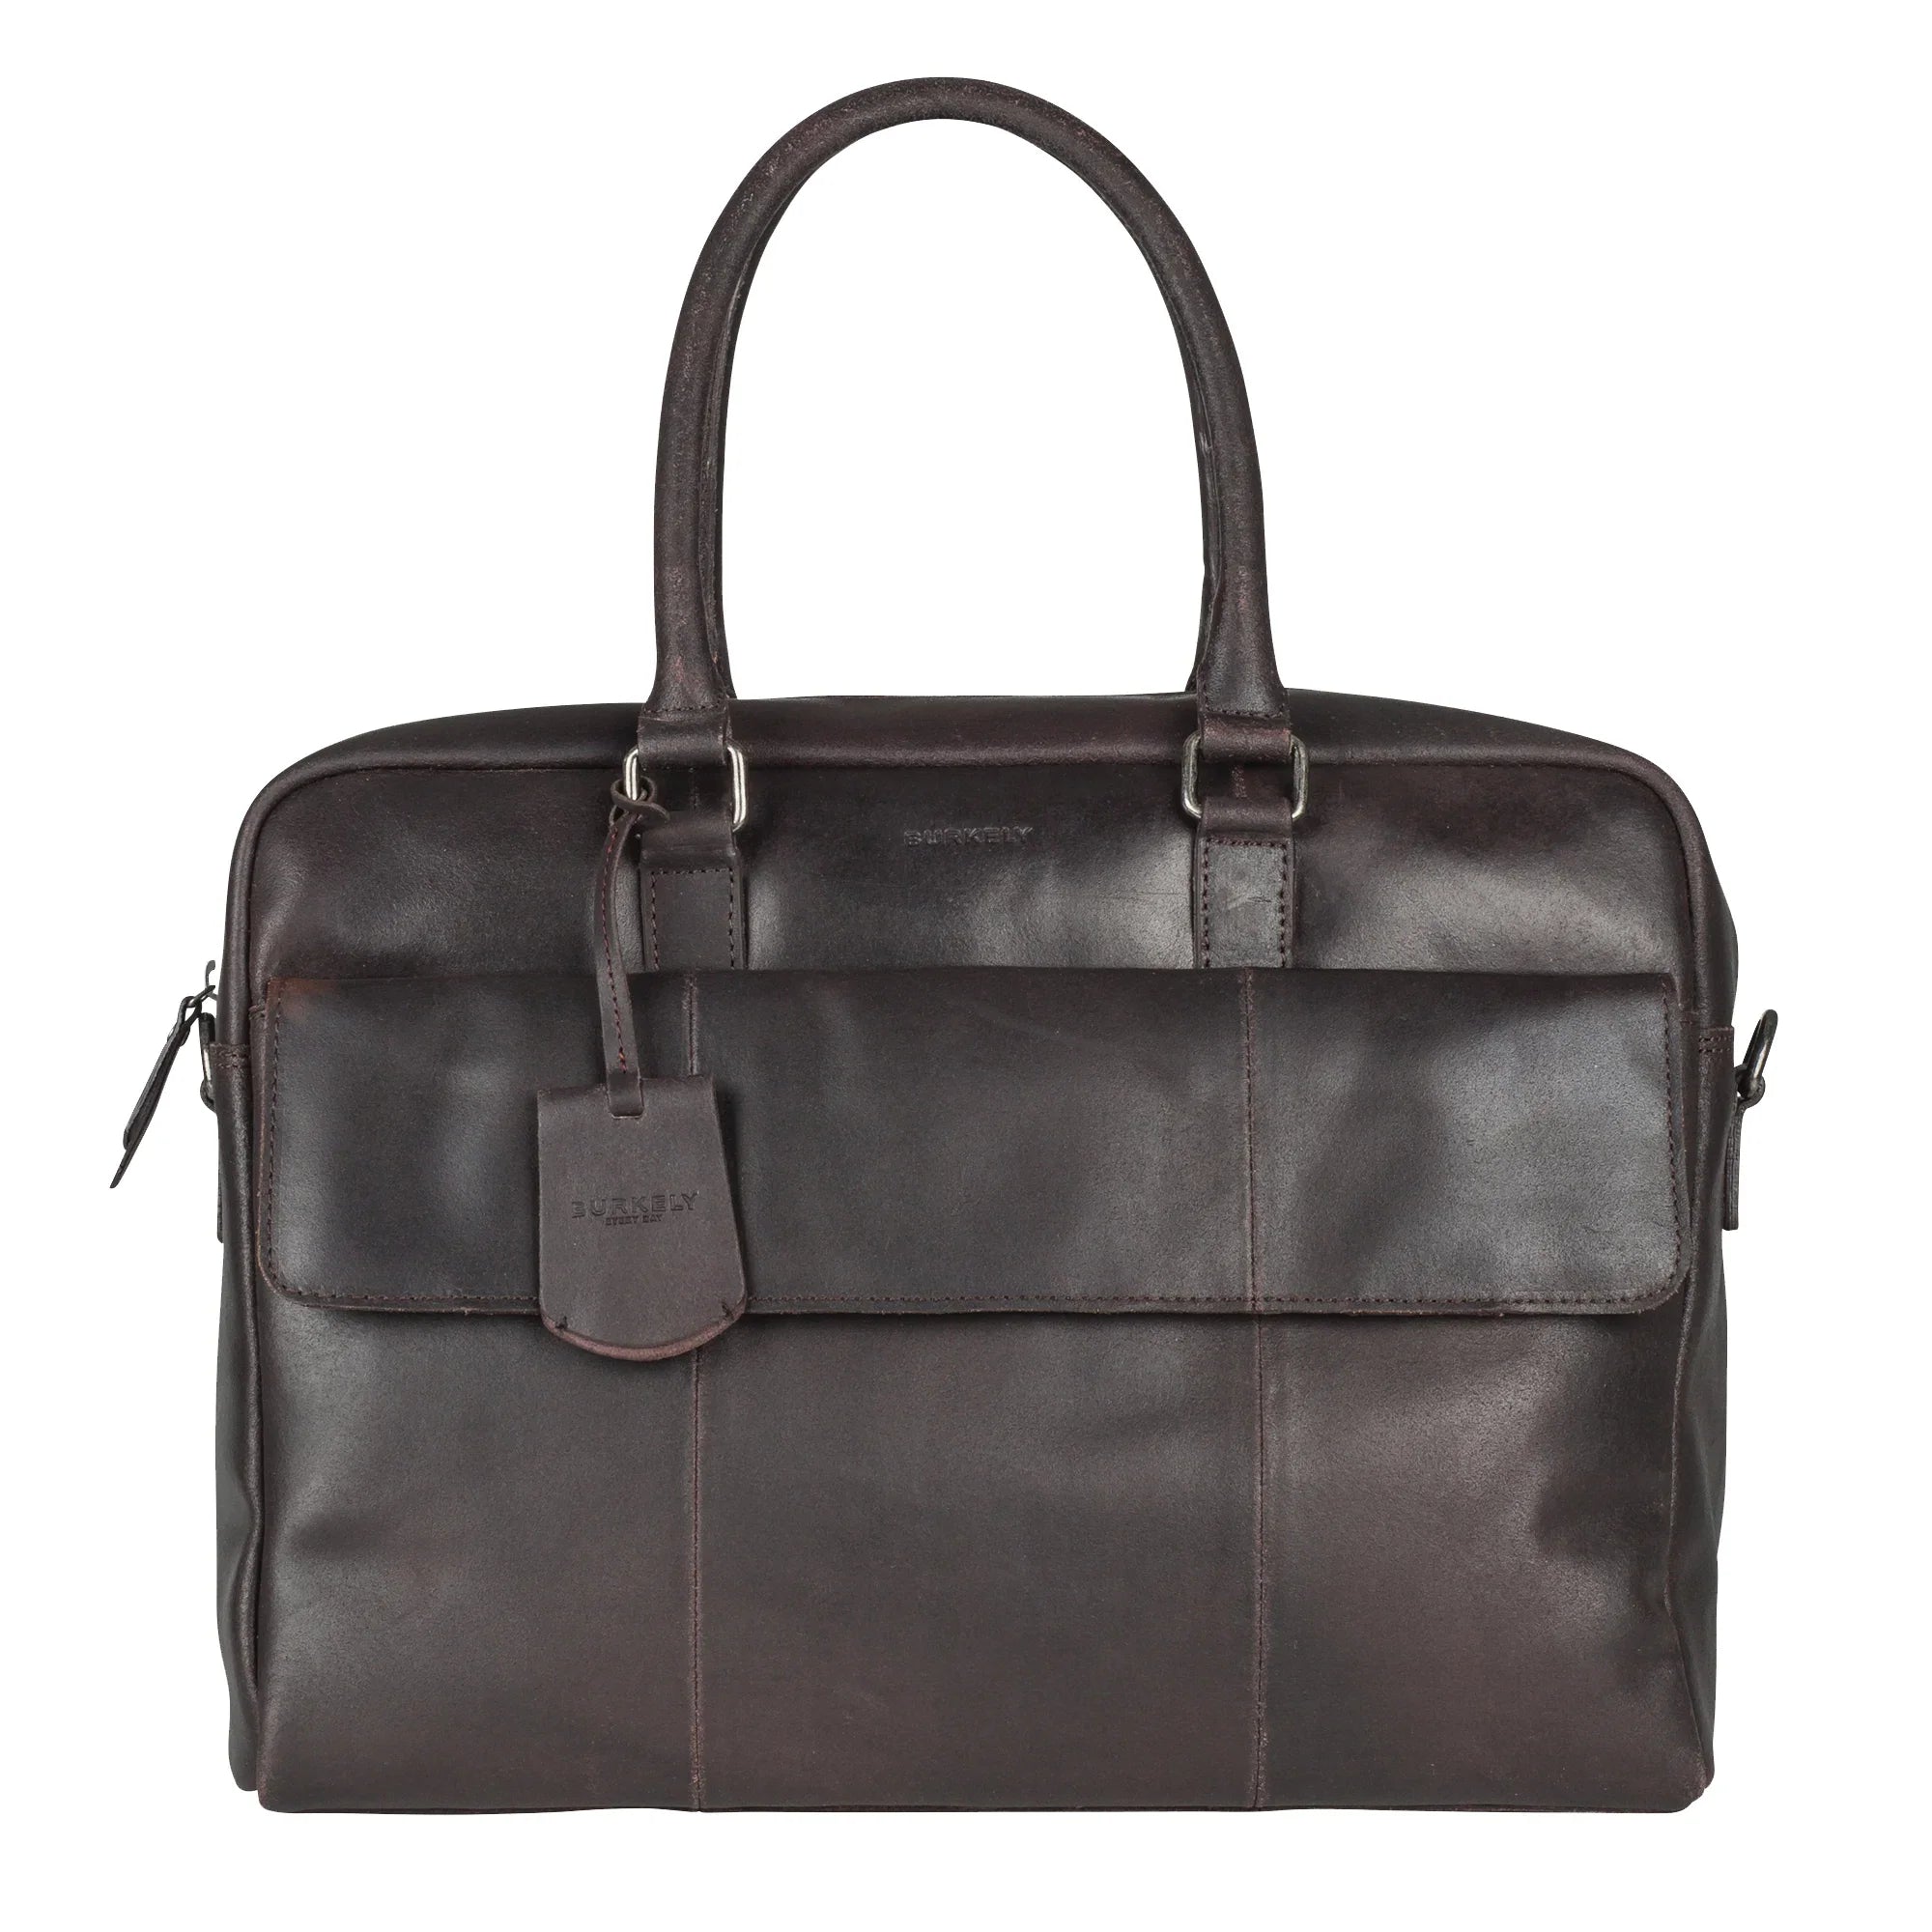 Burkely On The Move Laptoptasche 41 cm - brown